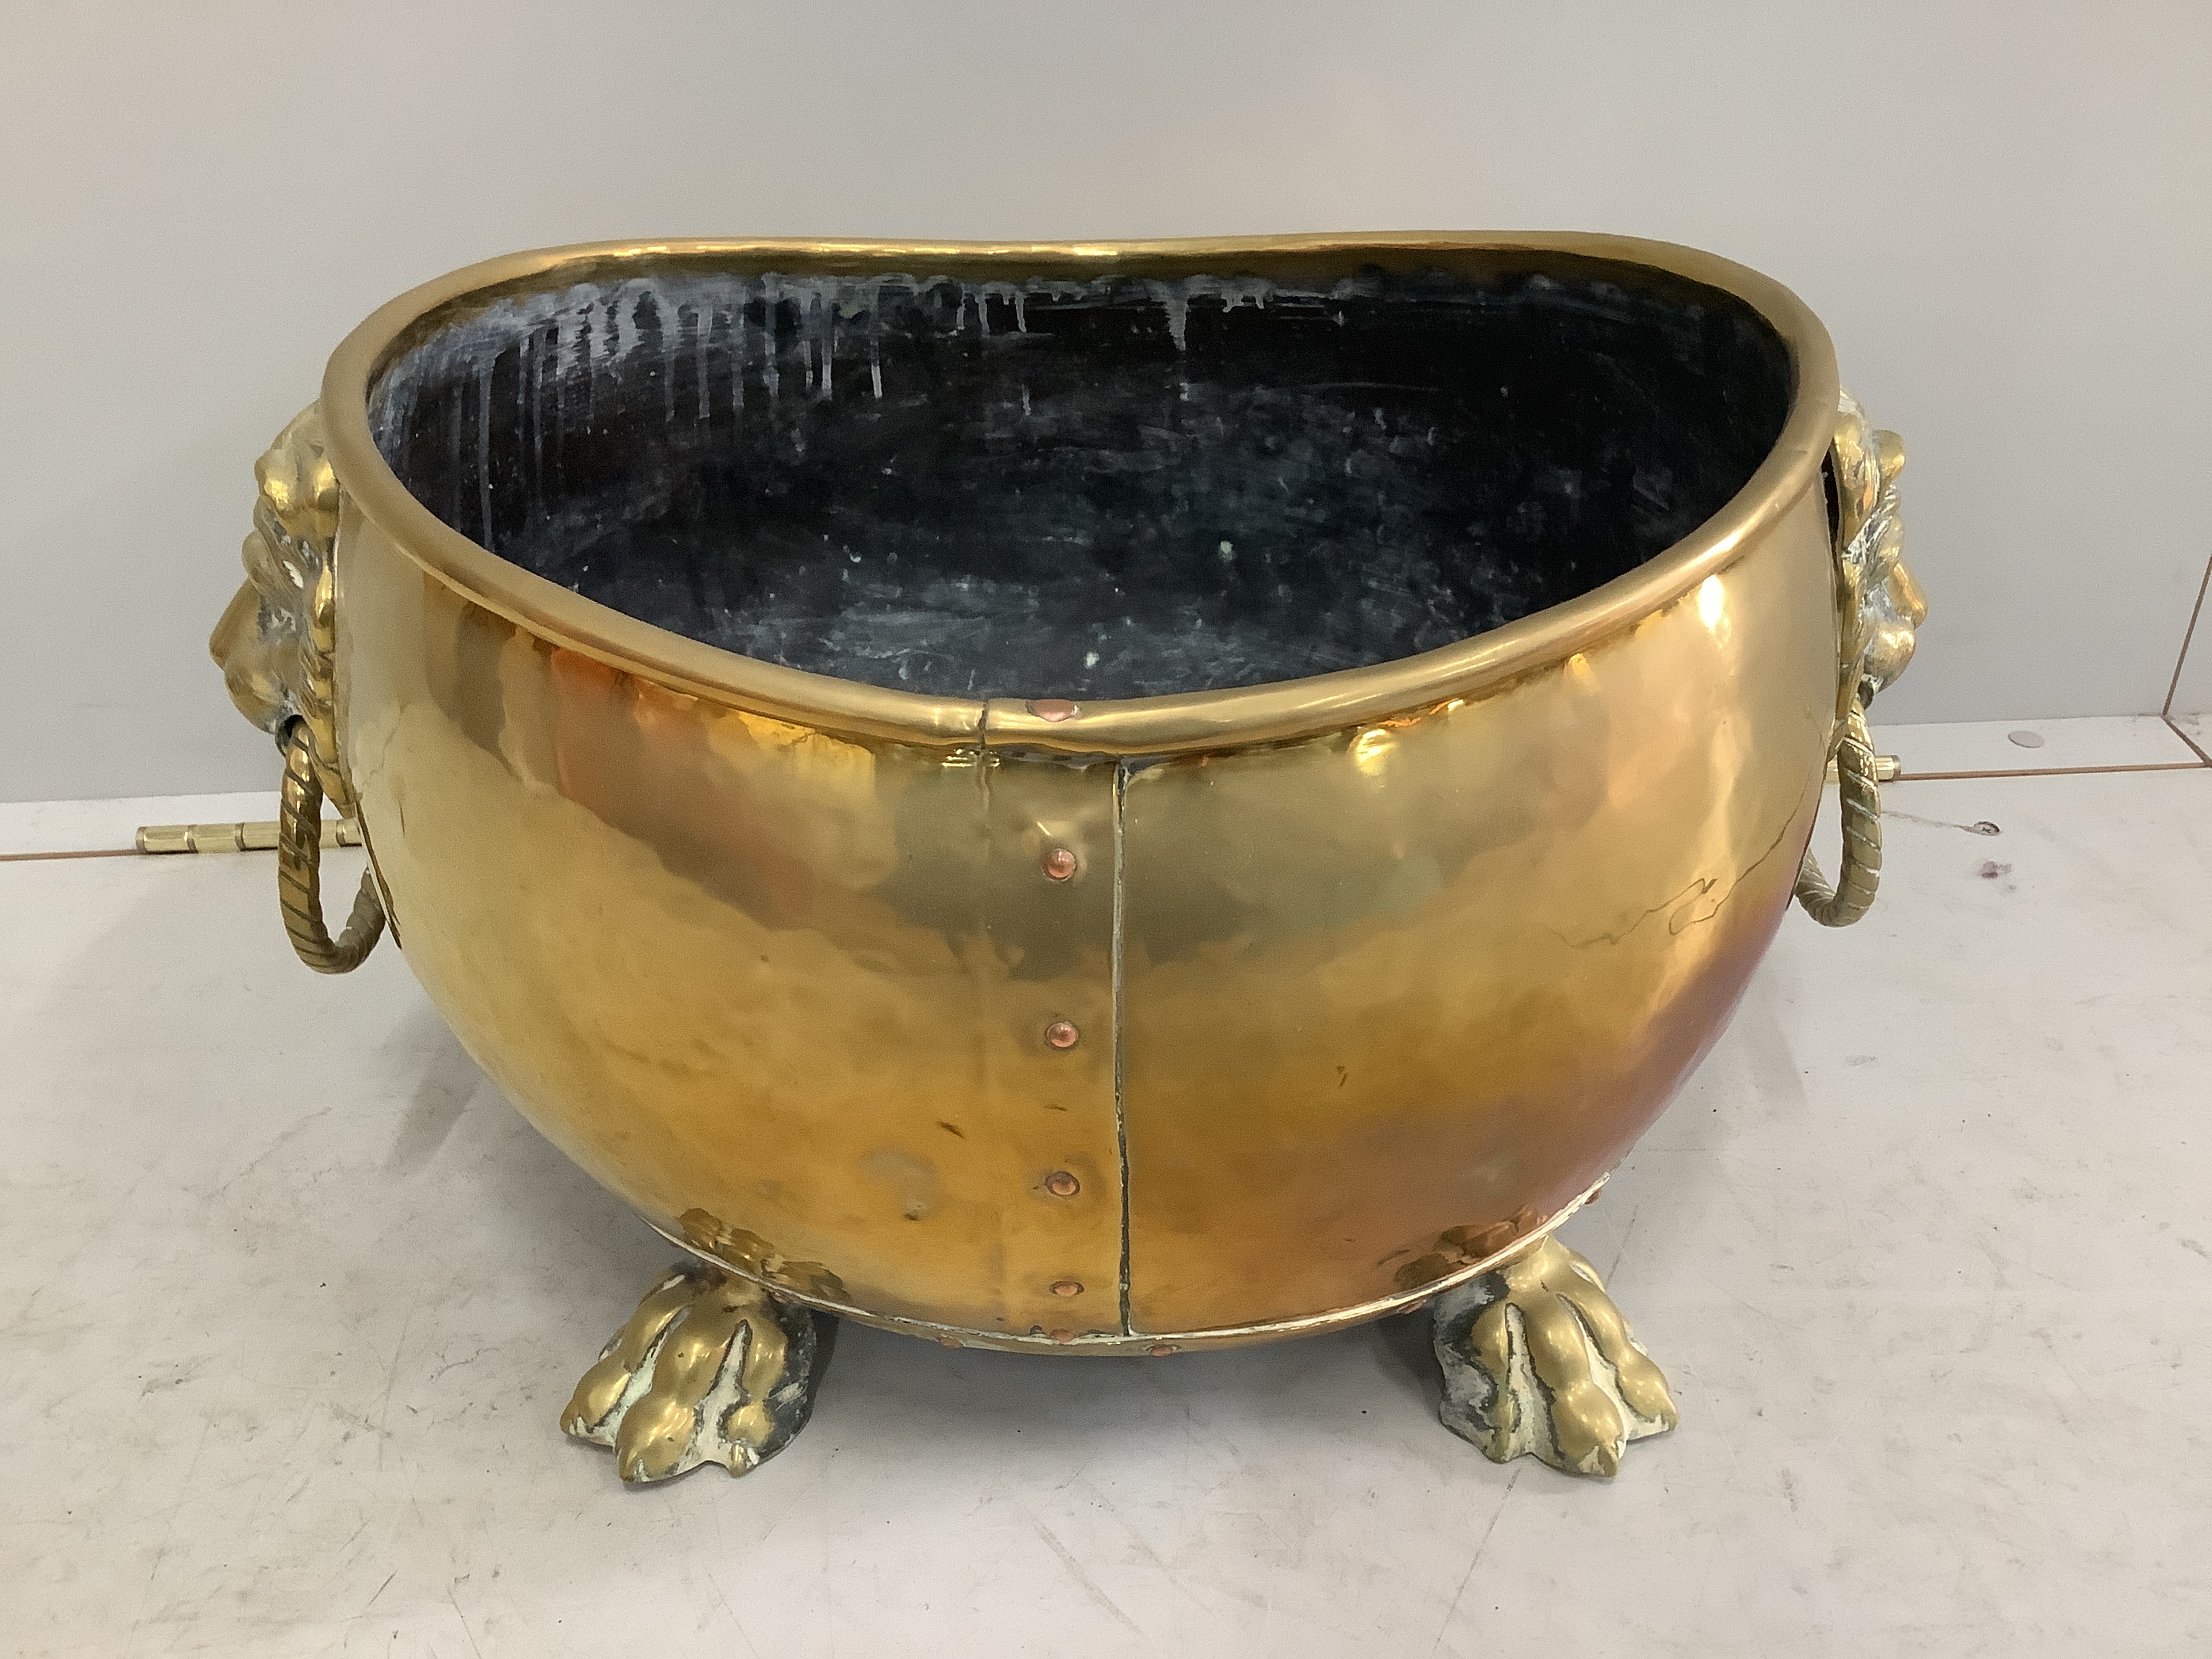 A 19th century Dutch oval and brass coal bin with lion mask ring handles, width 54cm, depth 40cm, height 30cm